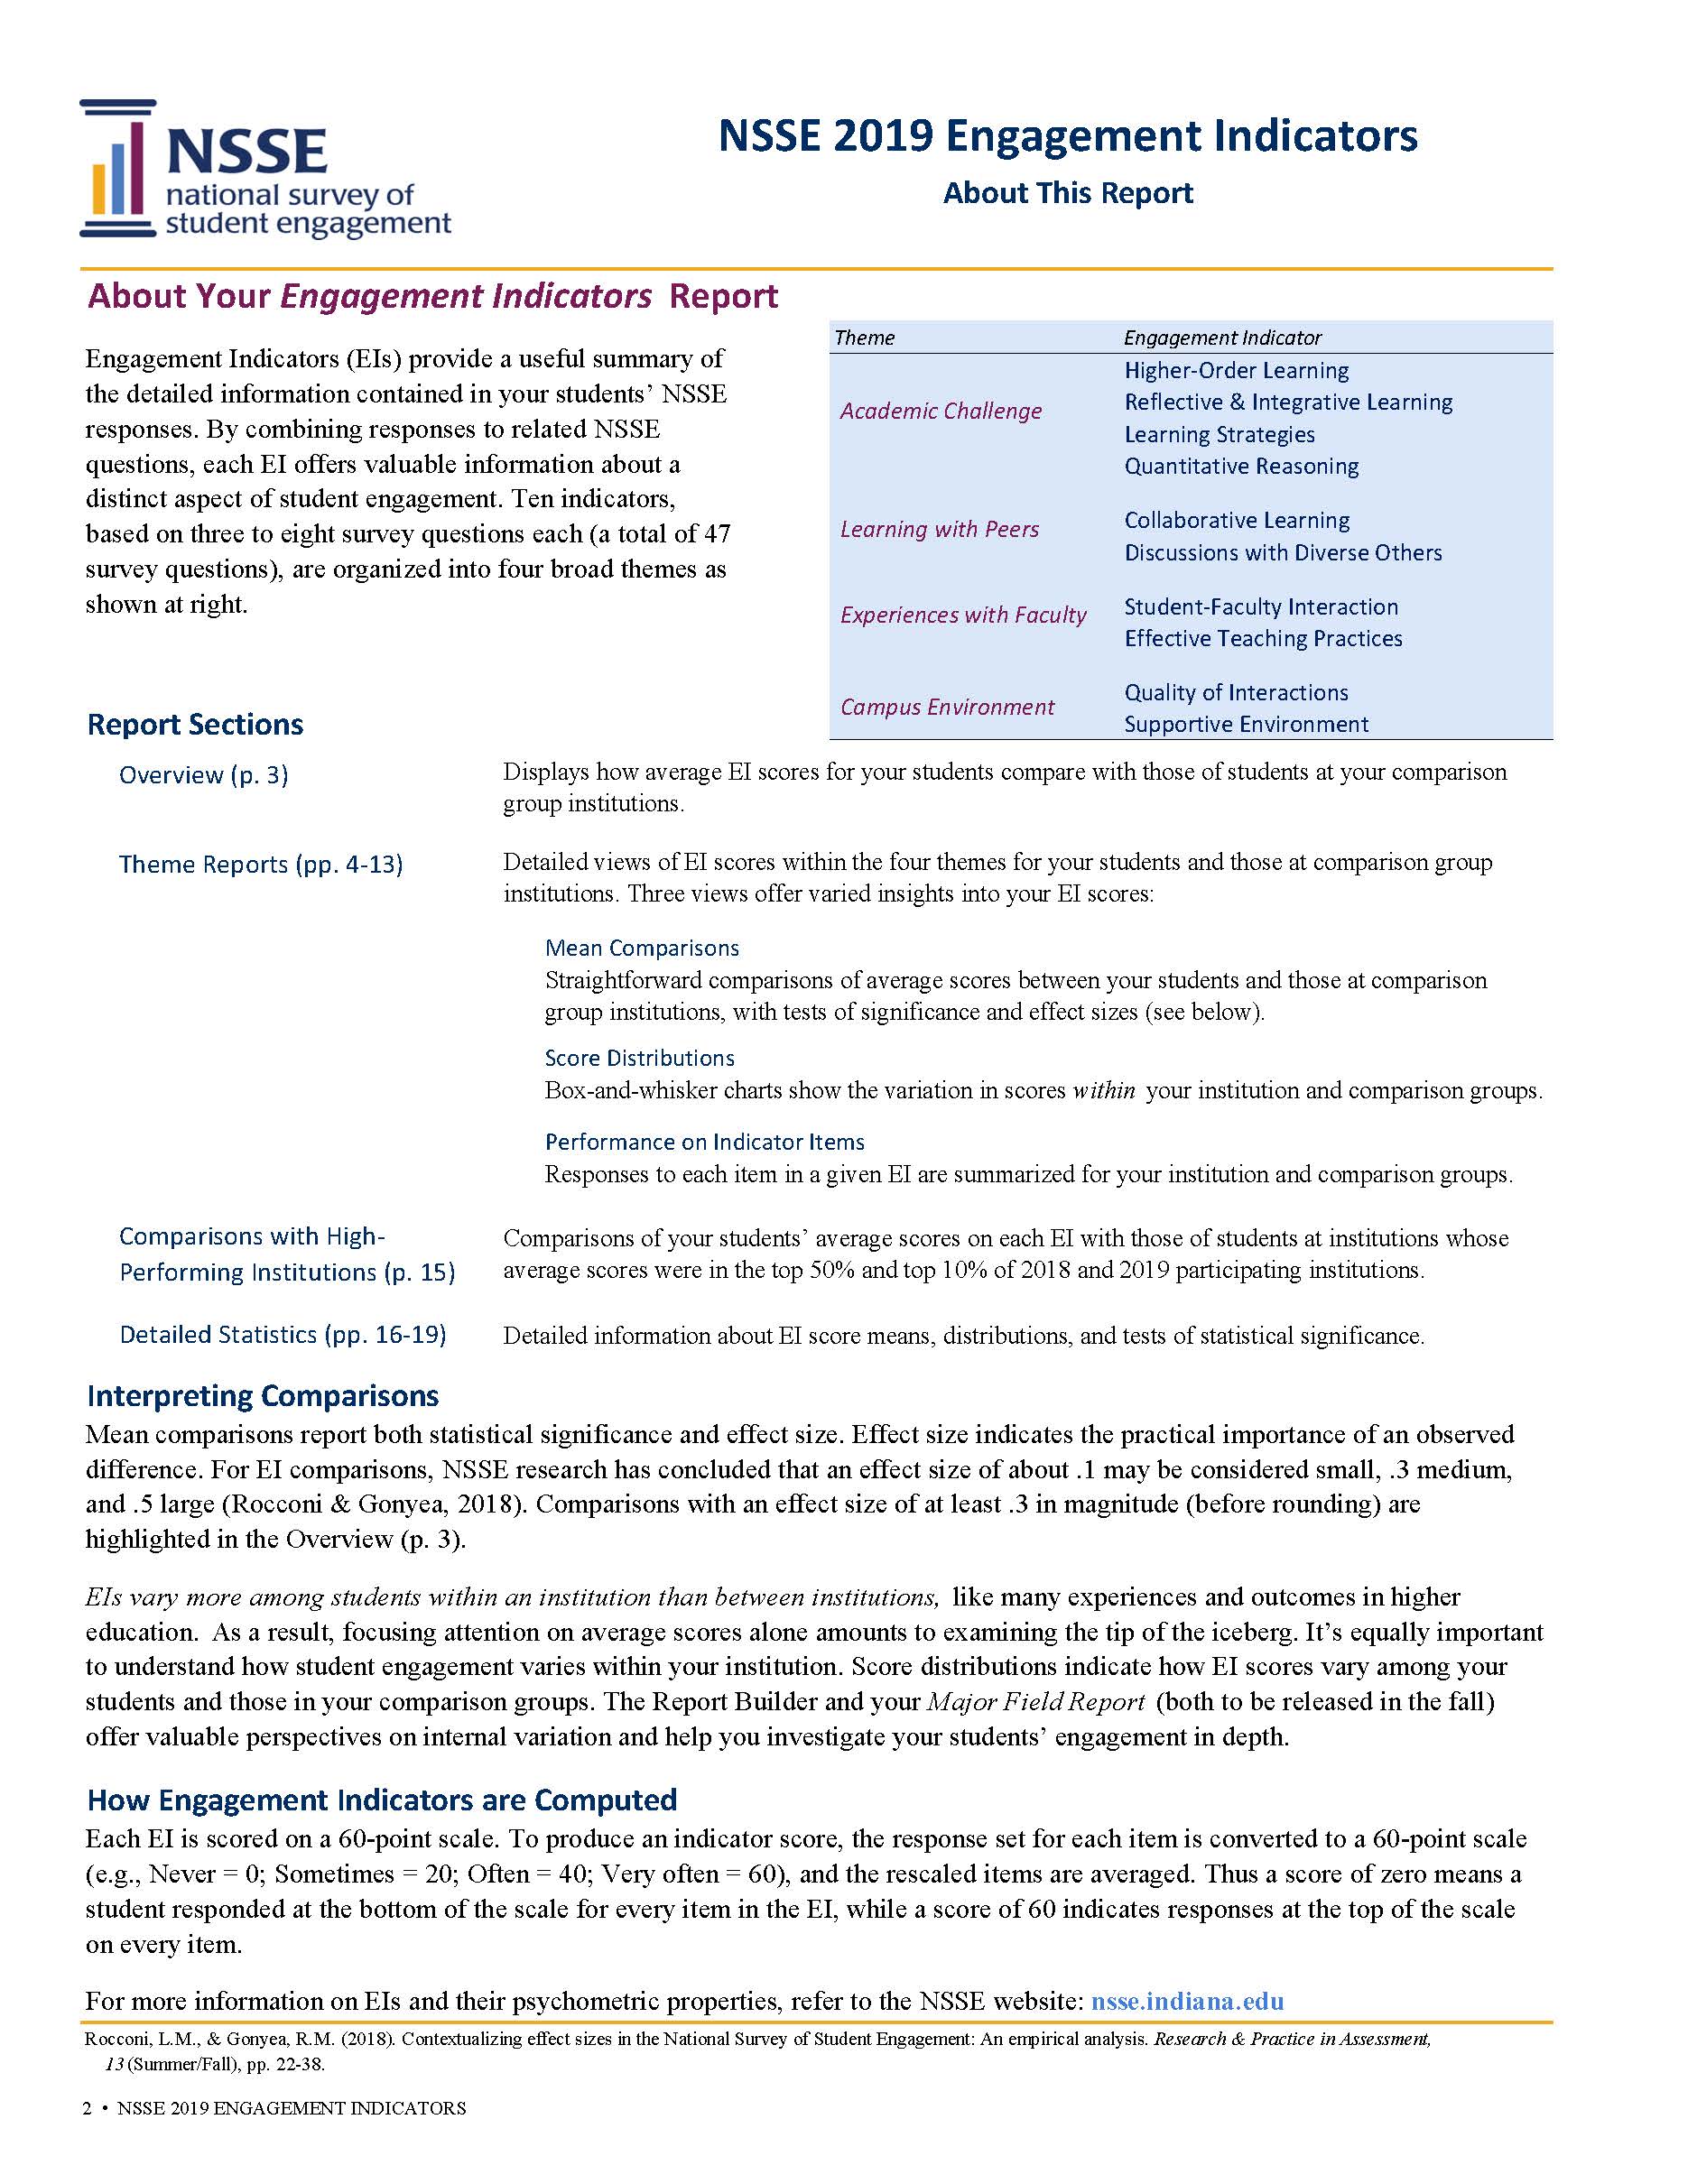 Sample Report: page 2 of NSSE Engagement Indicators